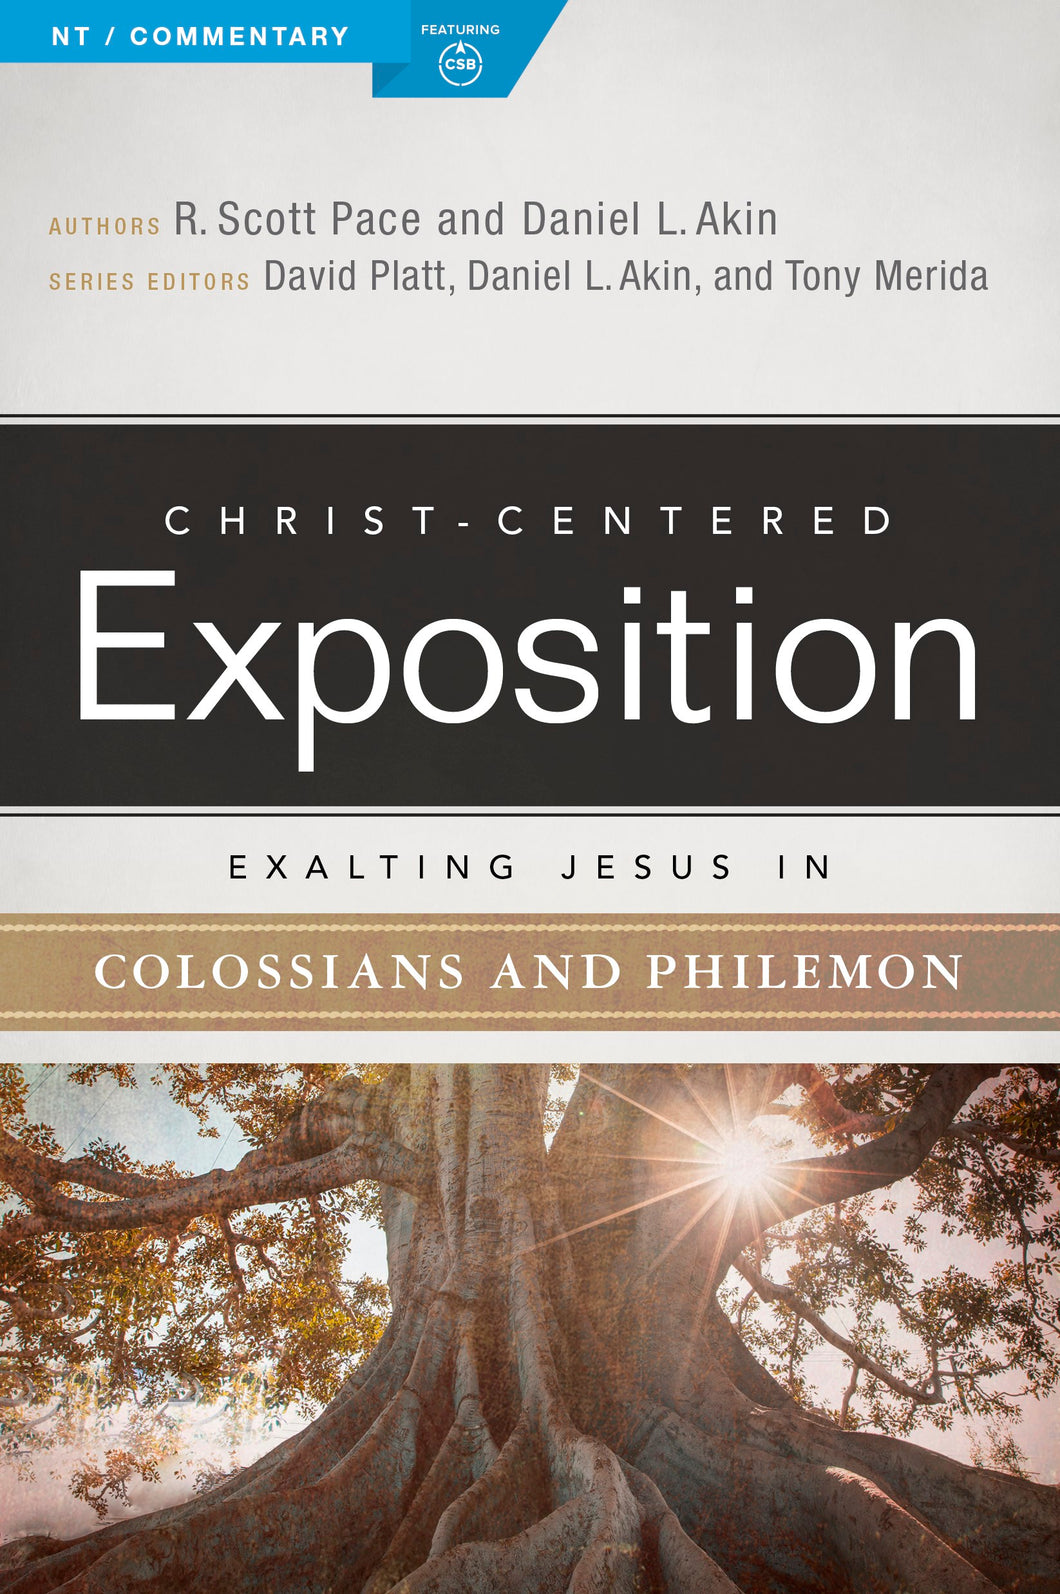 Exalting Jesus In Colossians & Philemon (Christ-Centered Exposition)